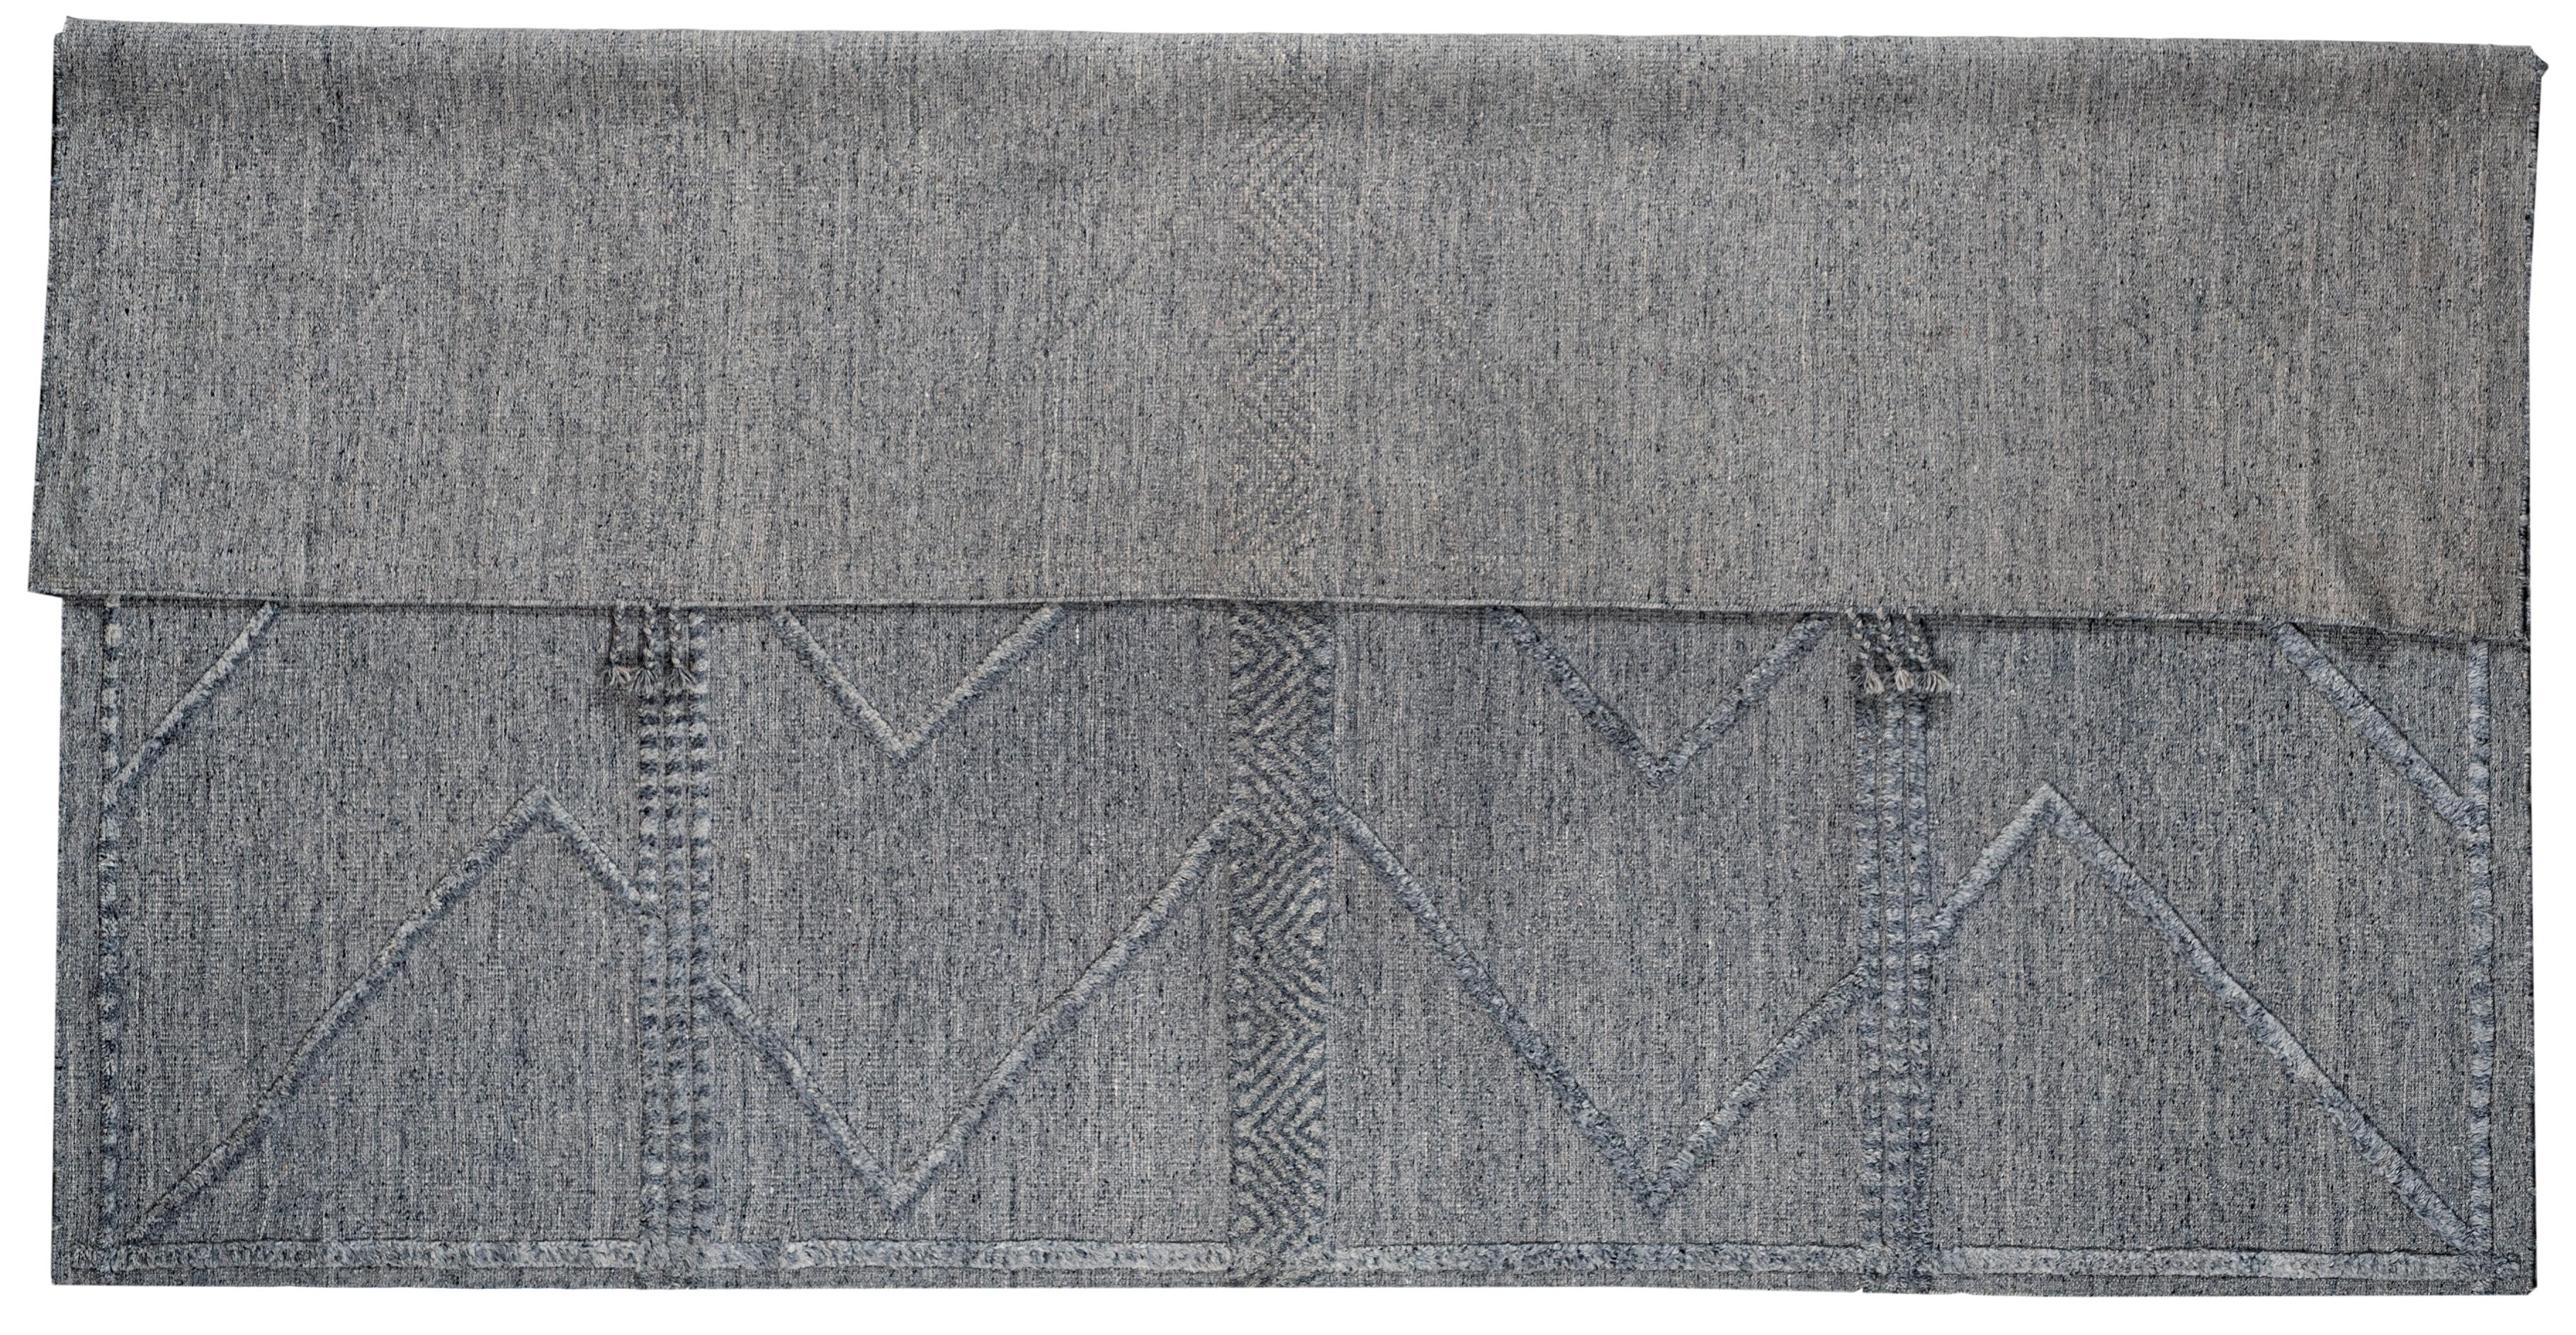 Coming from our newest collection of Moroccan designs, this 9x12 light grey and dark grey combination Moroccan design area rug is handmade and hand-knotted made in India. It has a cotton base and is made from all wool yarns. It features a